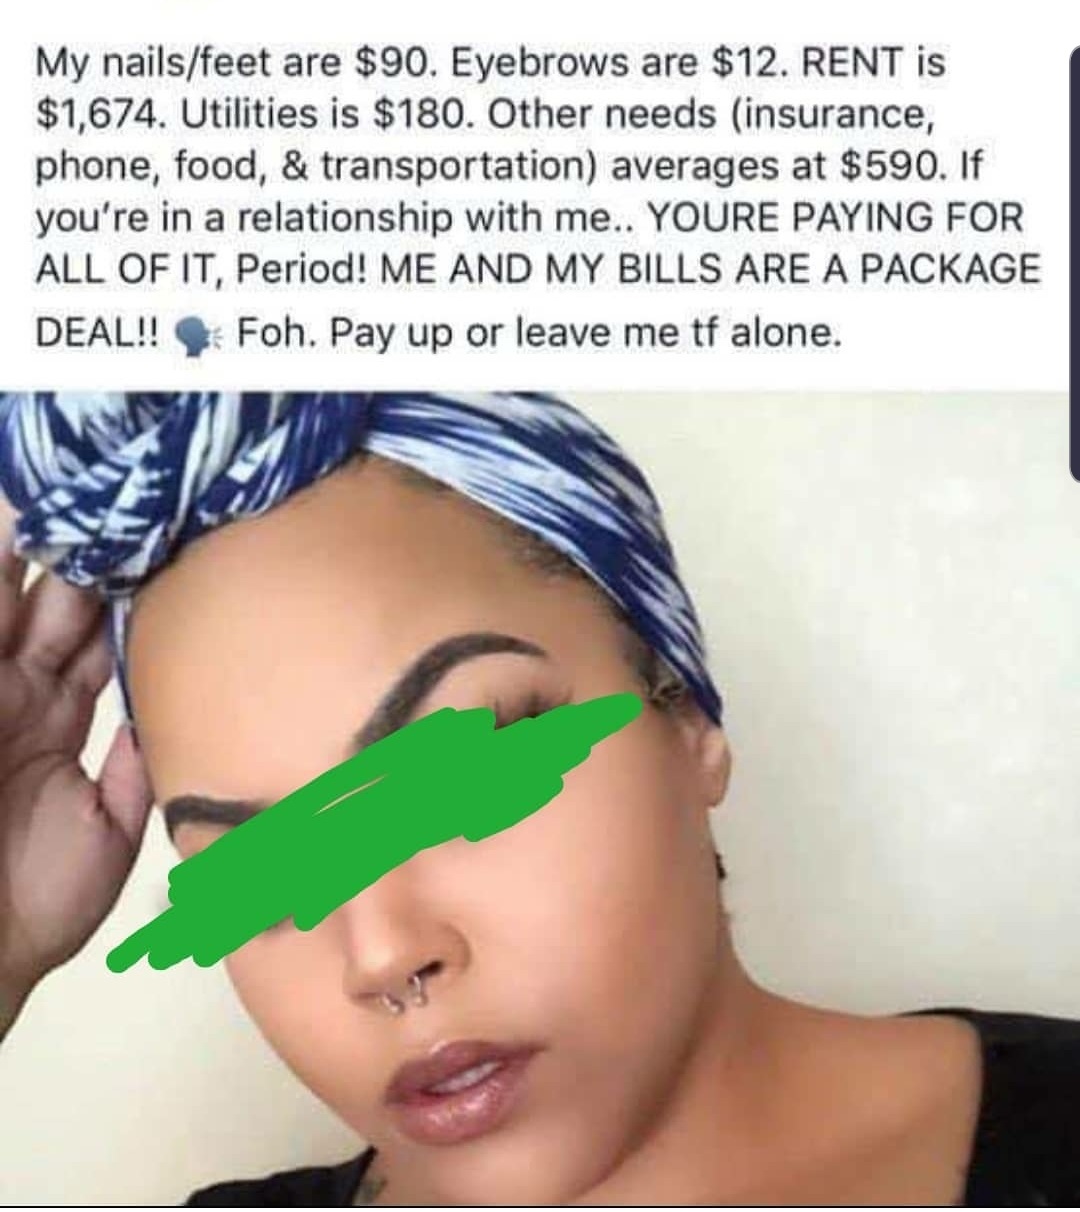 awfuleverything meme - My nailsfeet are $90. Eyebrows are $12. Rent is $1,674. Utilities is $180. Other needs insurance, phone, food, & transportation averages at $590. If you're in a relationship with me.. Youre Paying For All Of It, Period! Me And My Bi